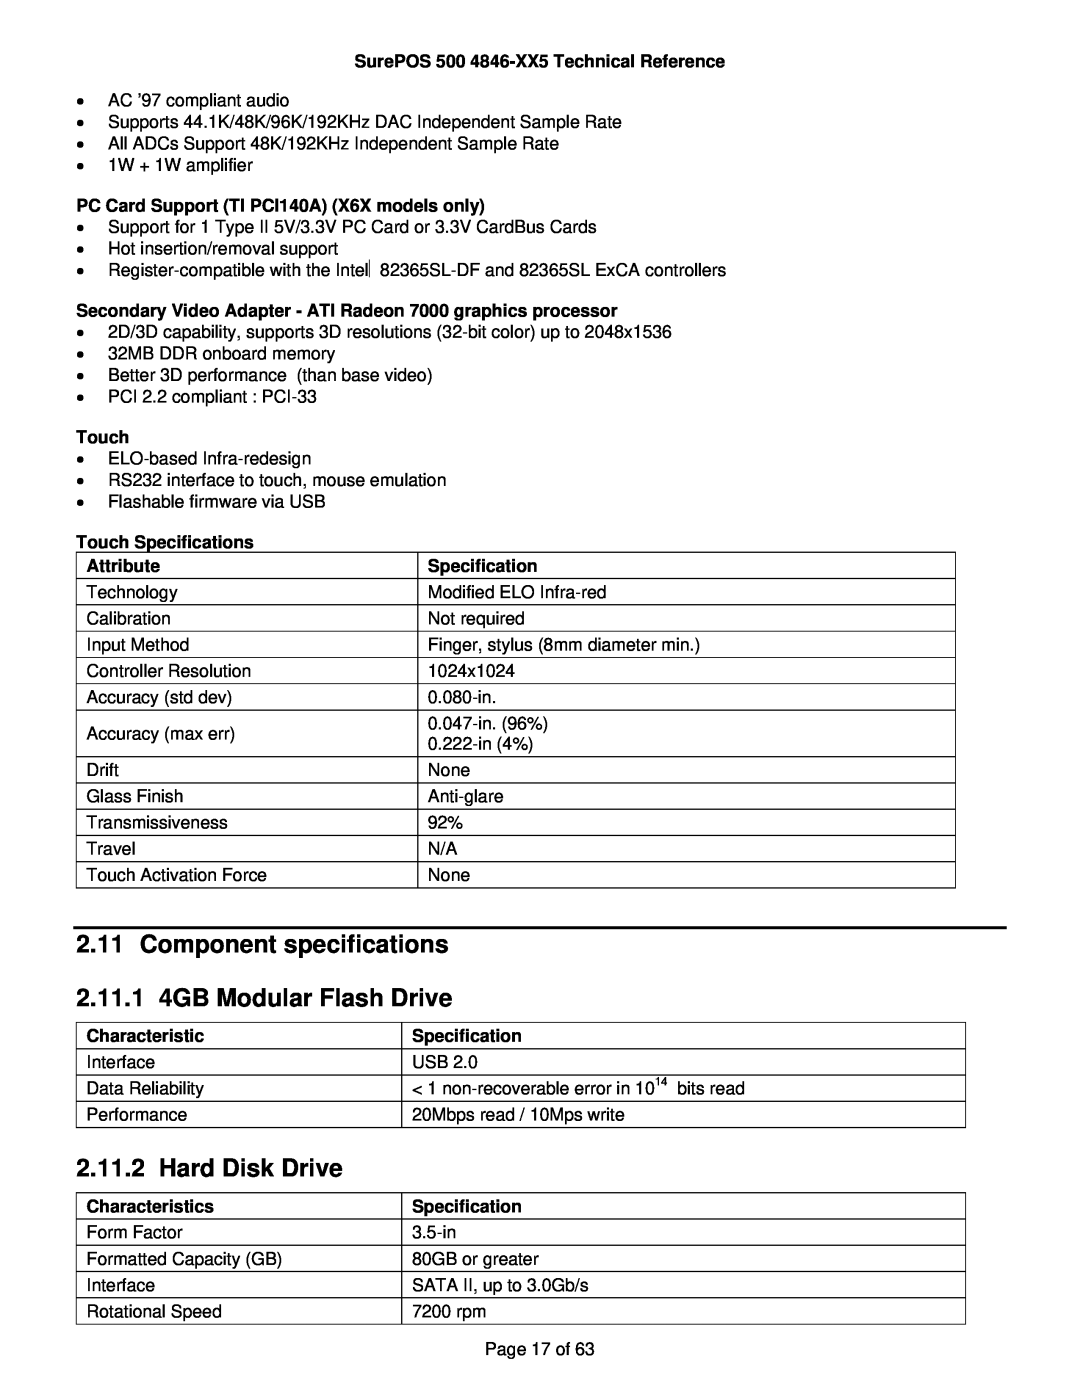 IBM 500 manual Hard Disk Drive, Component specifications 2.11.1 4GB Modular Flash Drive 